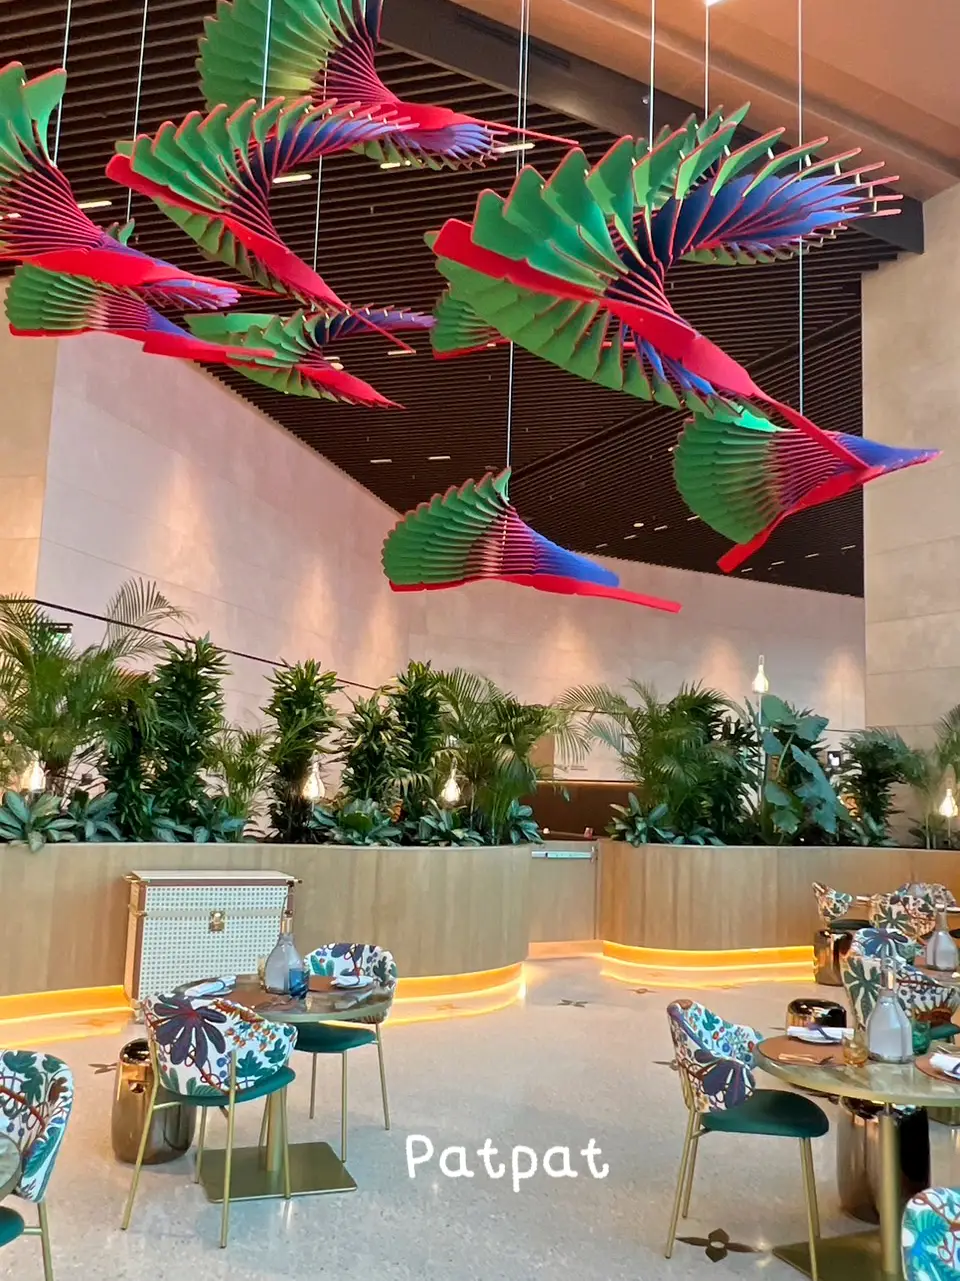 Louis Vuitton Lounge @ Doha Qarta 🇺🇸🎉, Gallery posted by Lazy review